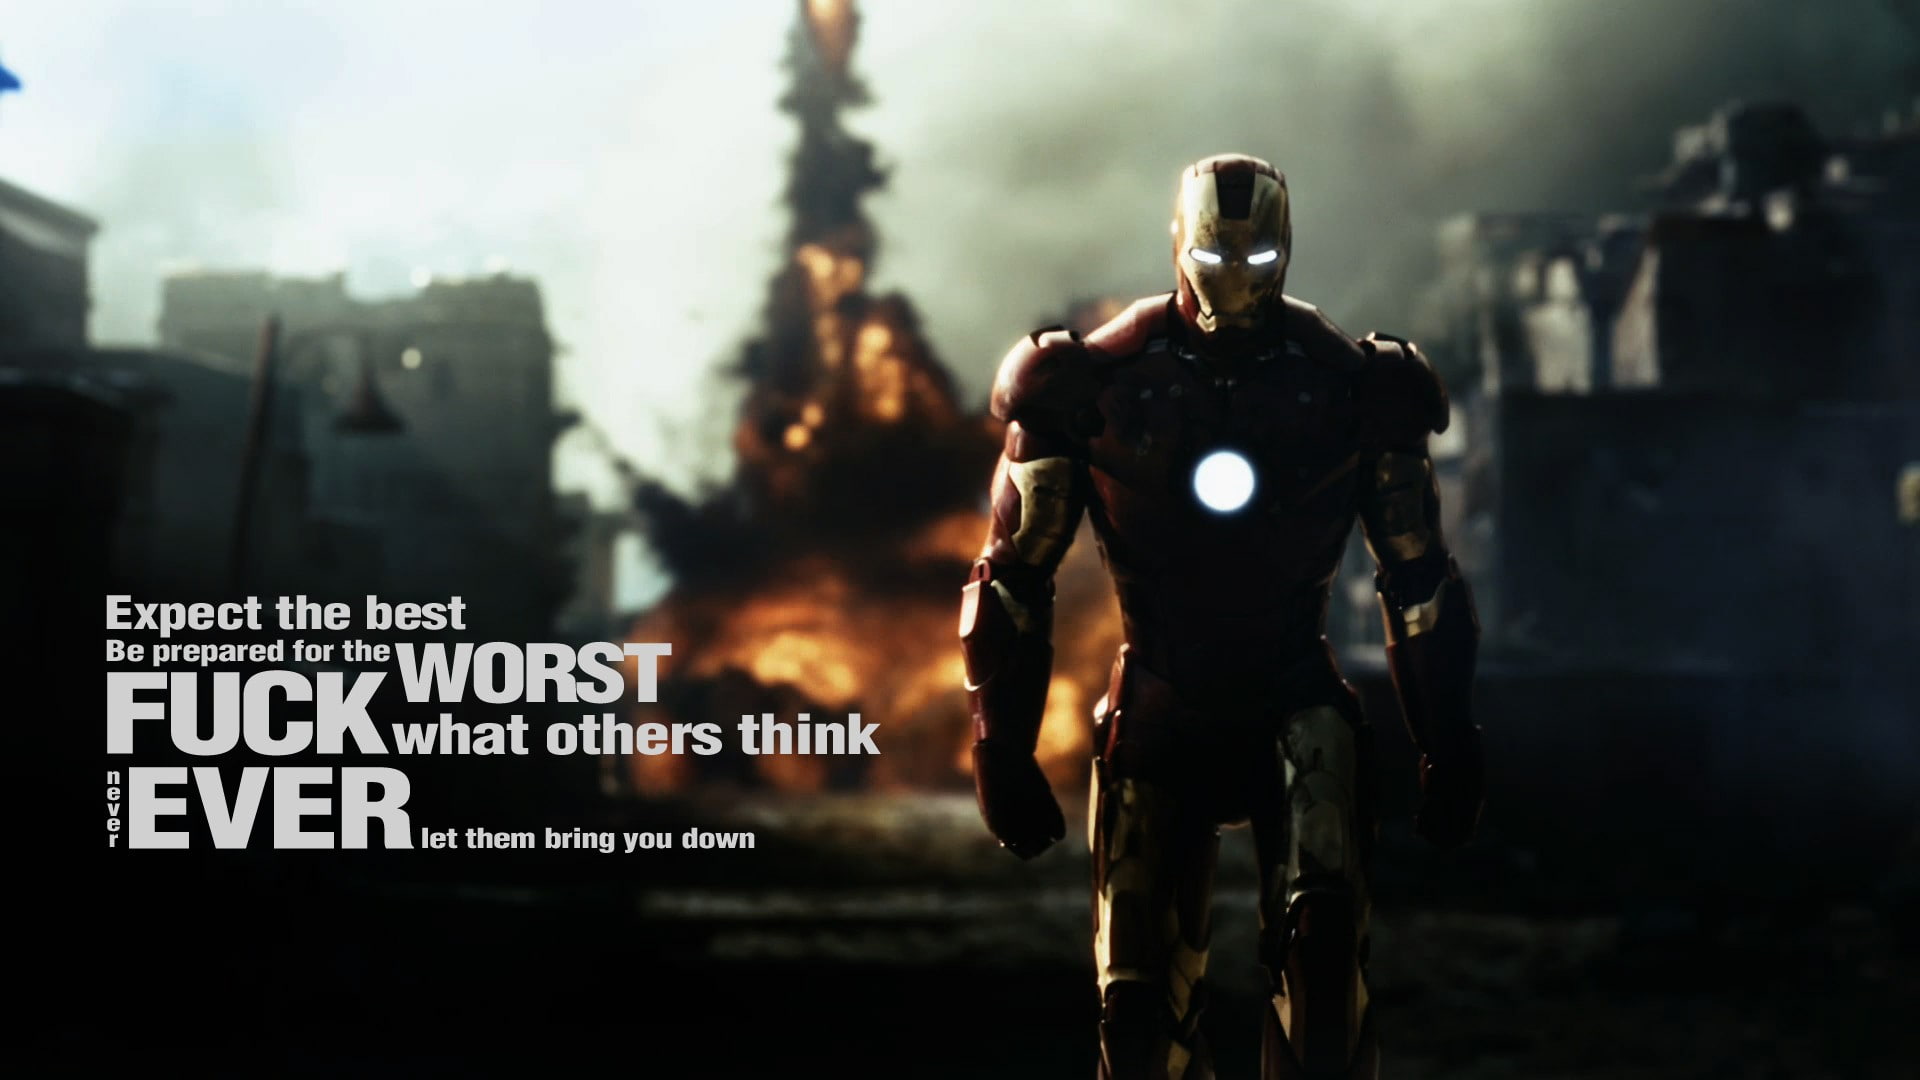 Iron man, motivational, quote, text, one person, communication